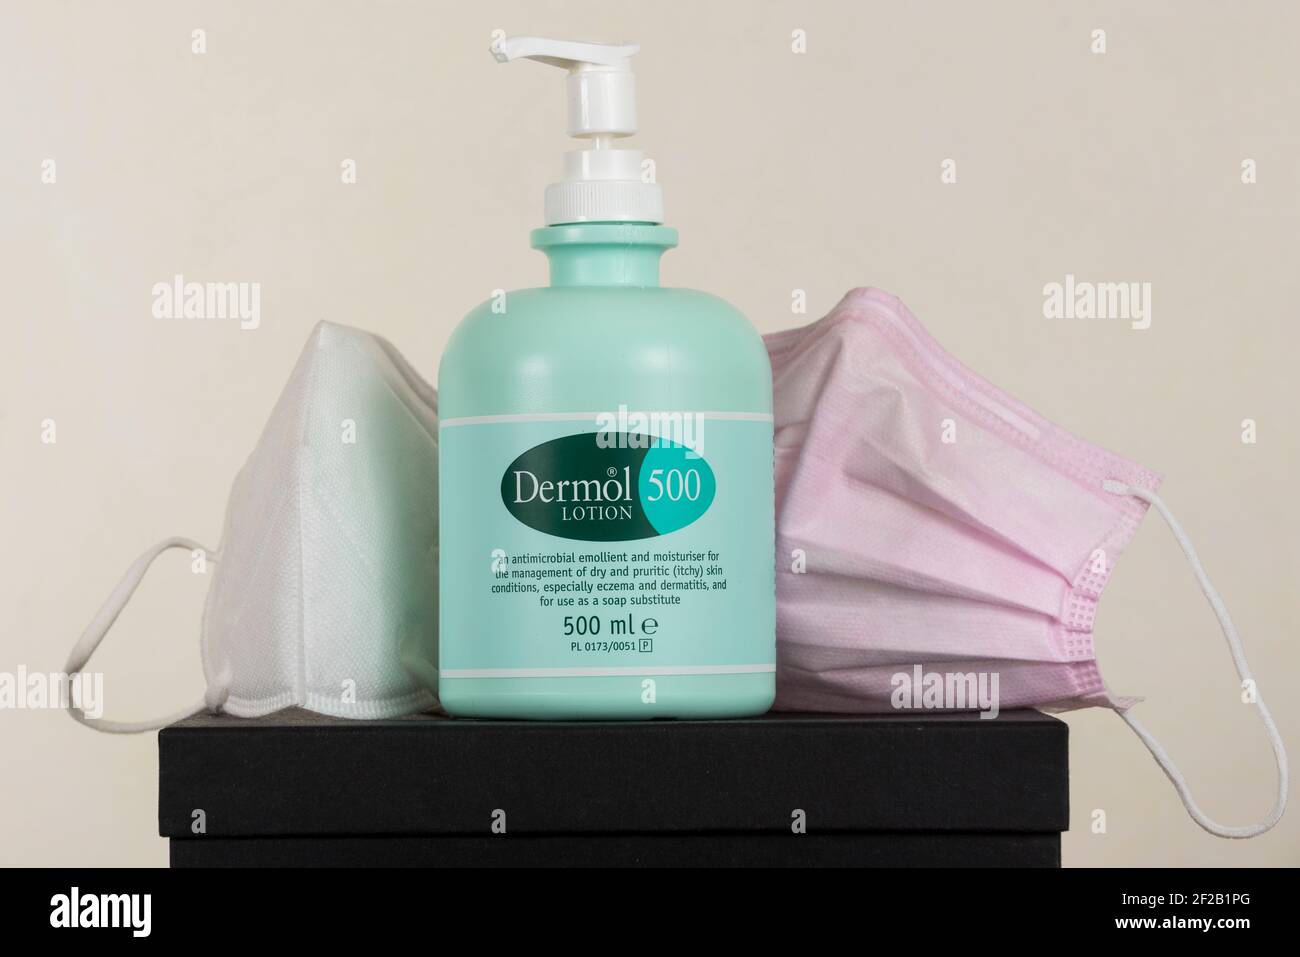 London, UK. 11 March 2021. A bottle of Dermol 500, an antimicrobial soap  substitute which also contains an emollient to help keep skin hydrated,  shown next to facemasks. It has been reported